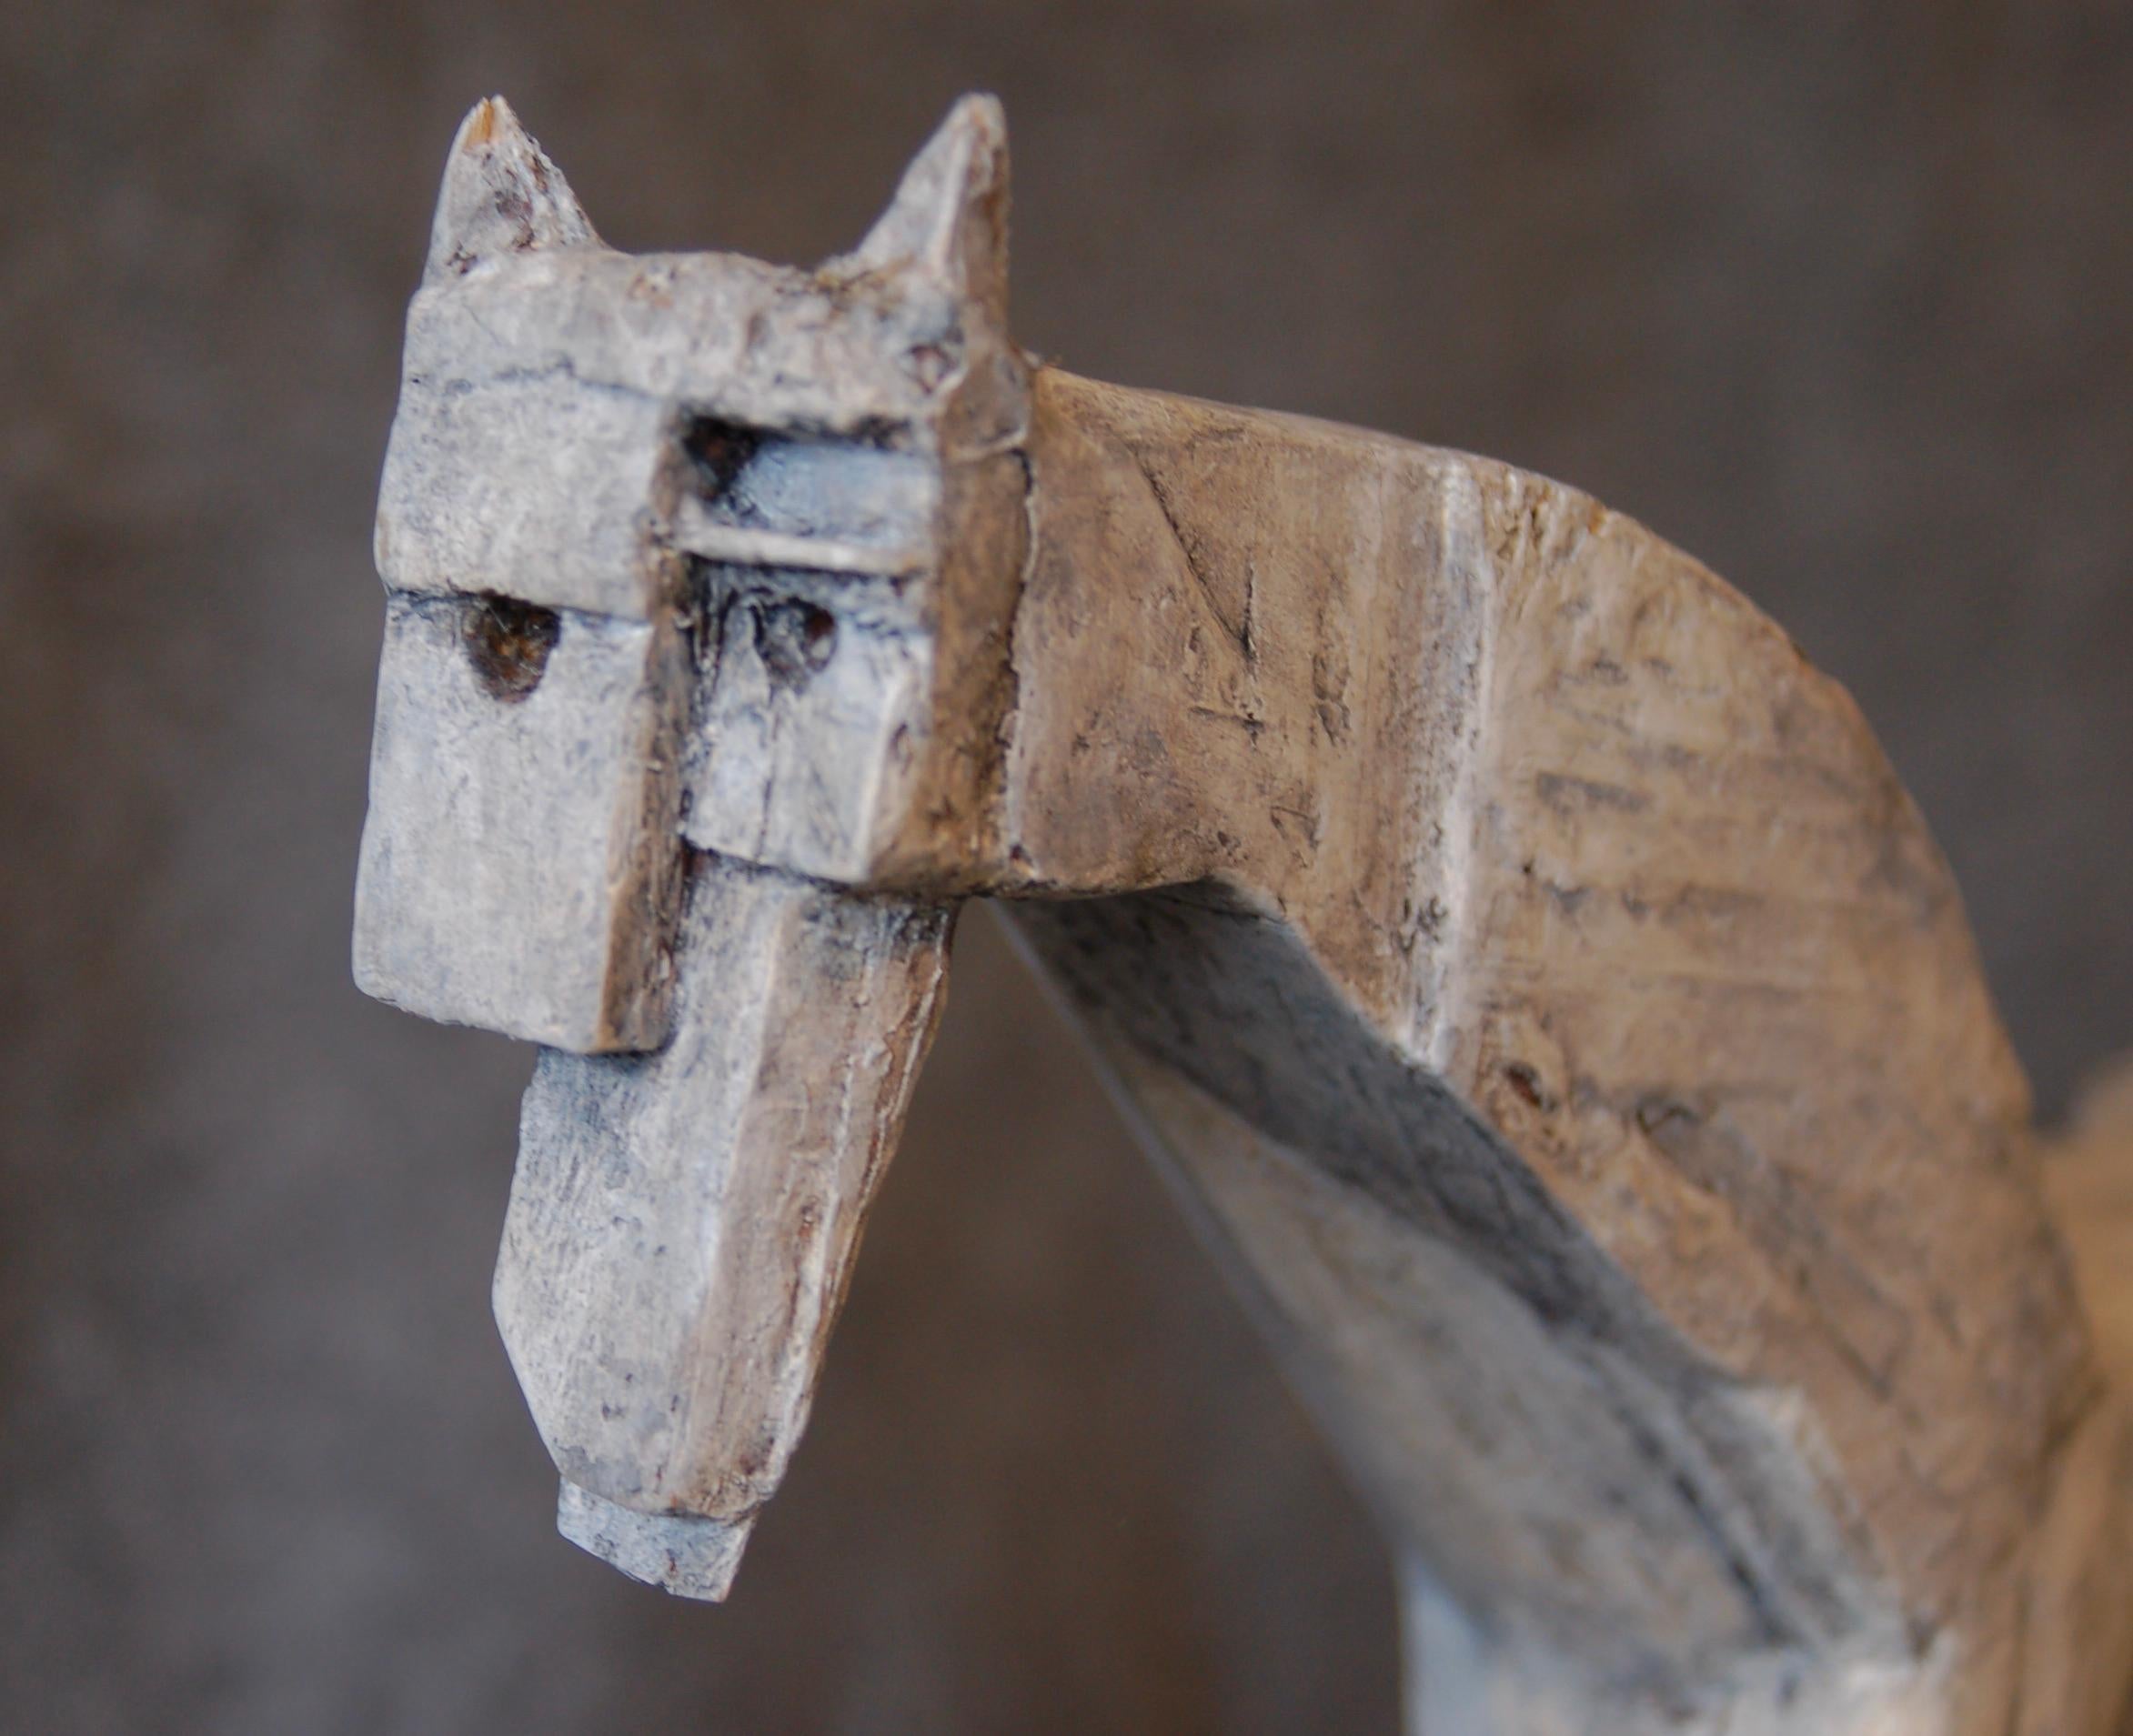 The Gray Pony is an abstract Cubist sculpture of a horse. Made primarily from wooden sticks of various sizes and textures, The Gray Pony is sealed with wax and putty, painted with acrylic paint and finished with a coat of polyurethane. 

I created